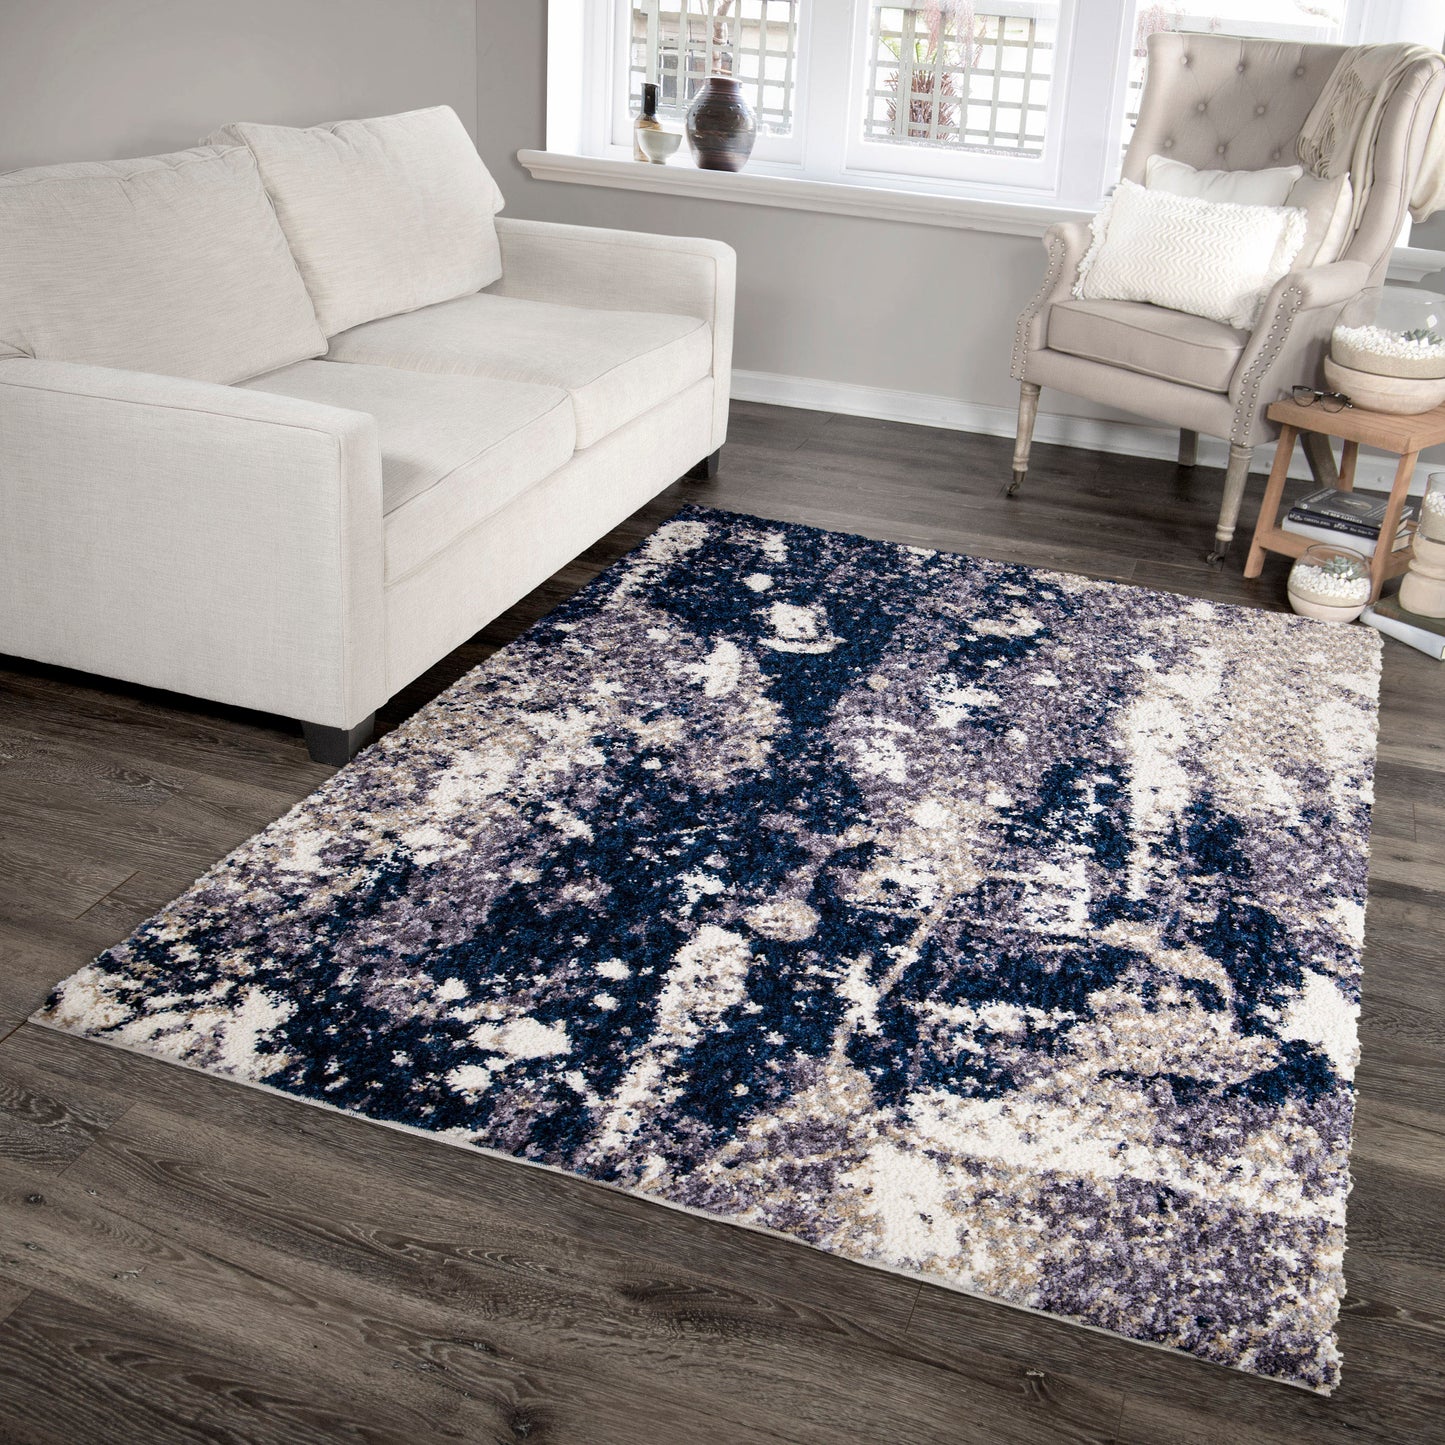 Cotton Tail Expose Synthetic Blend Indoor Area Rug by Orian Rugs